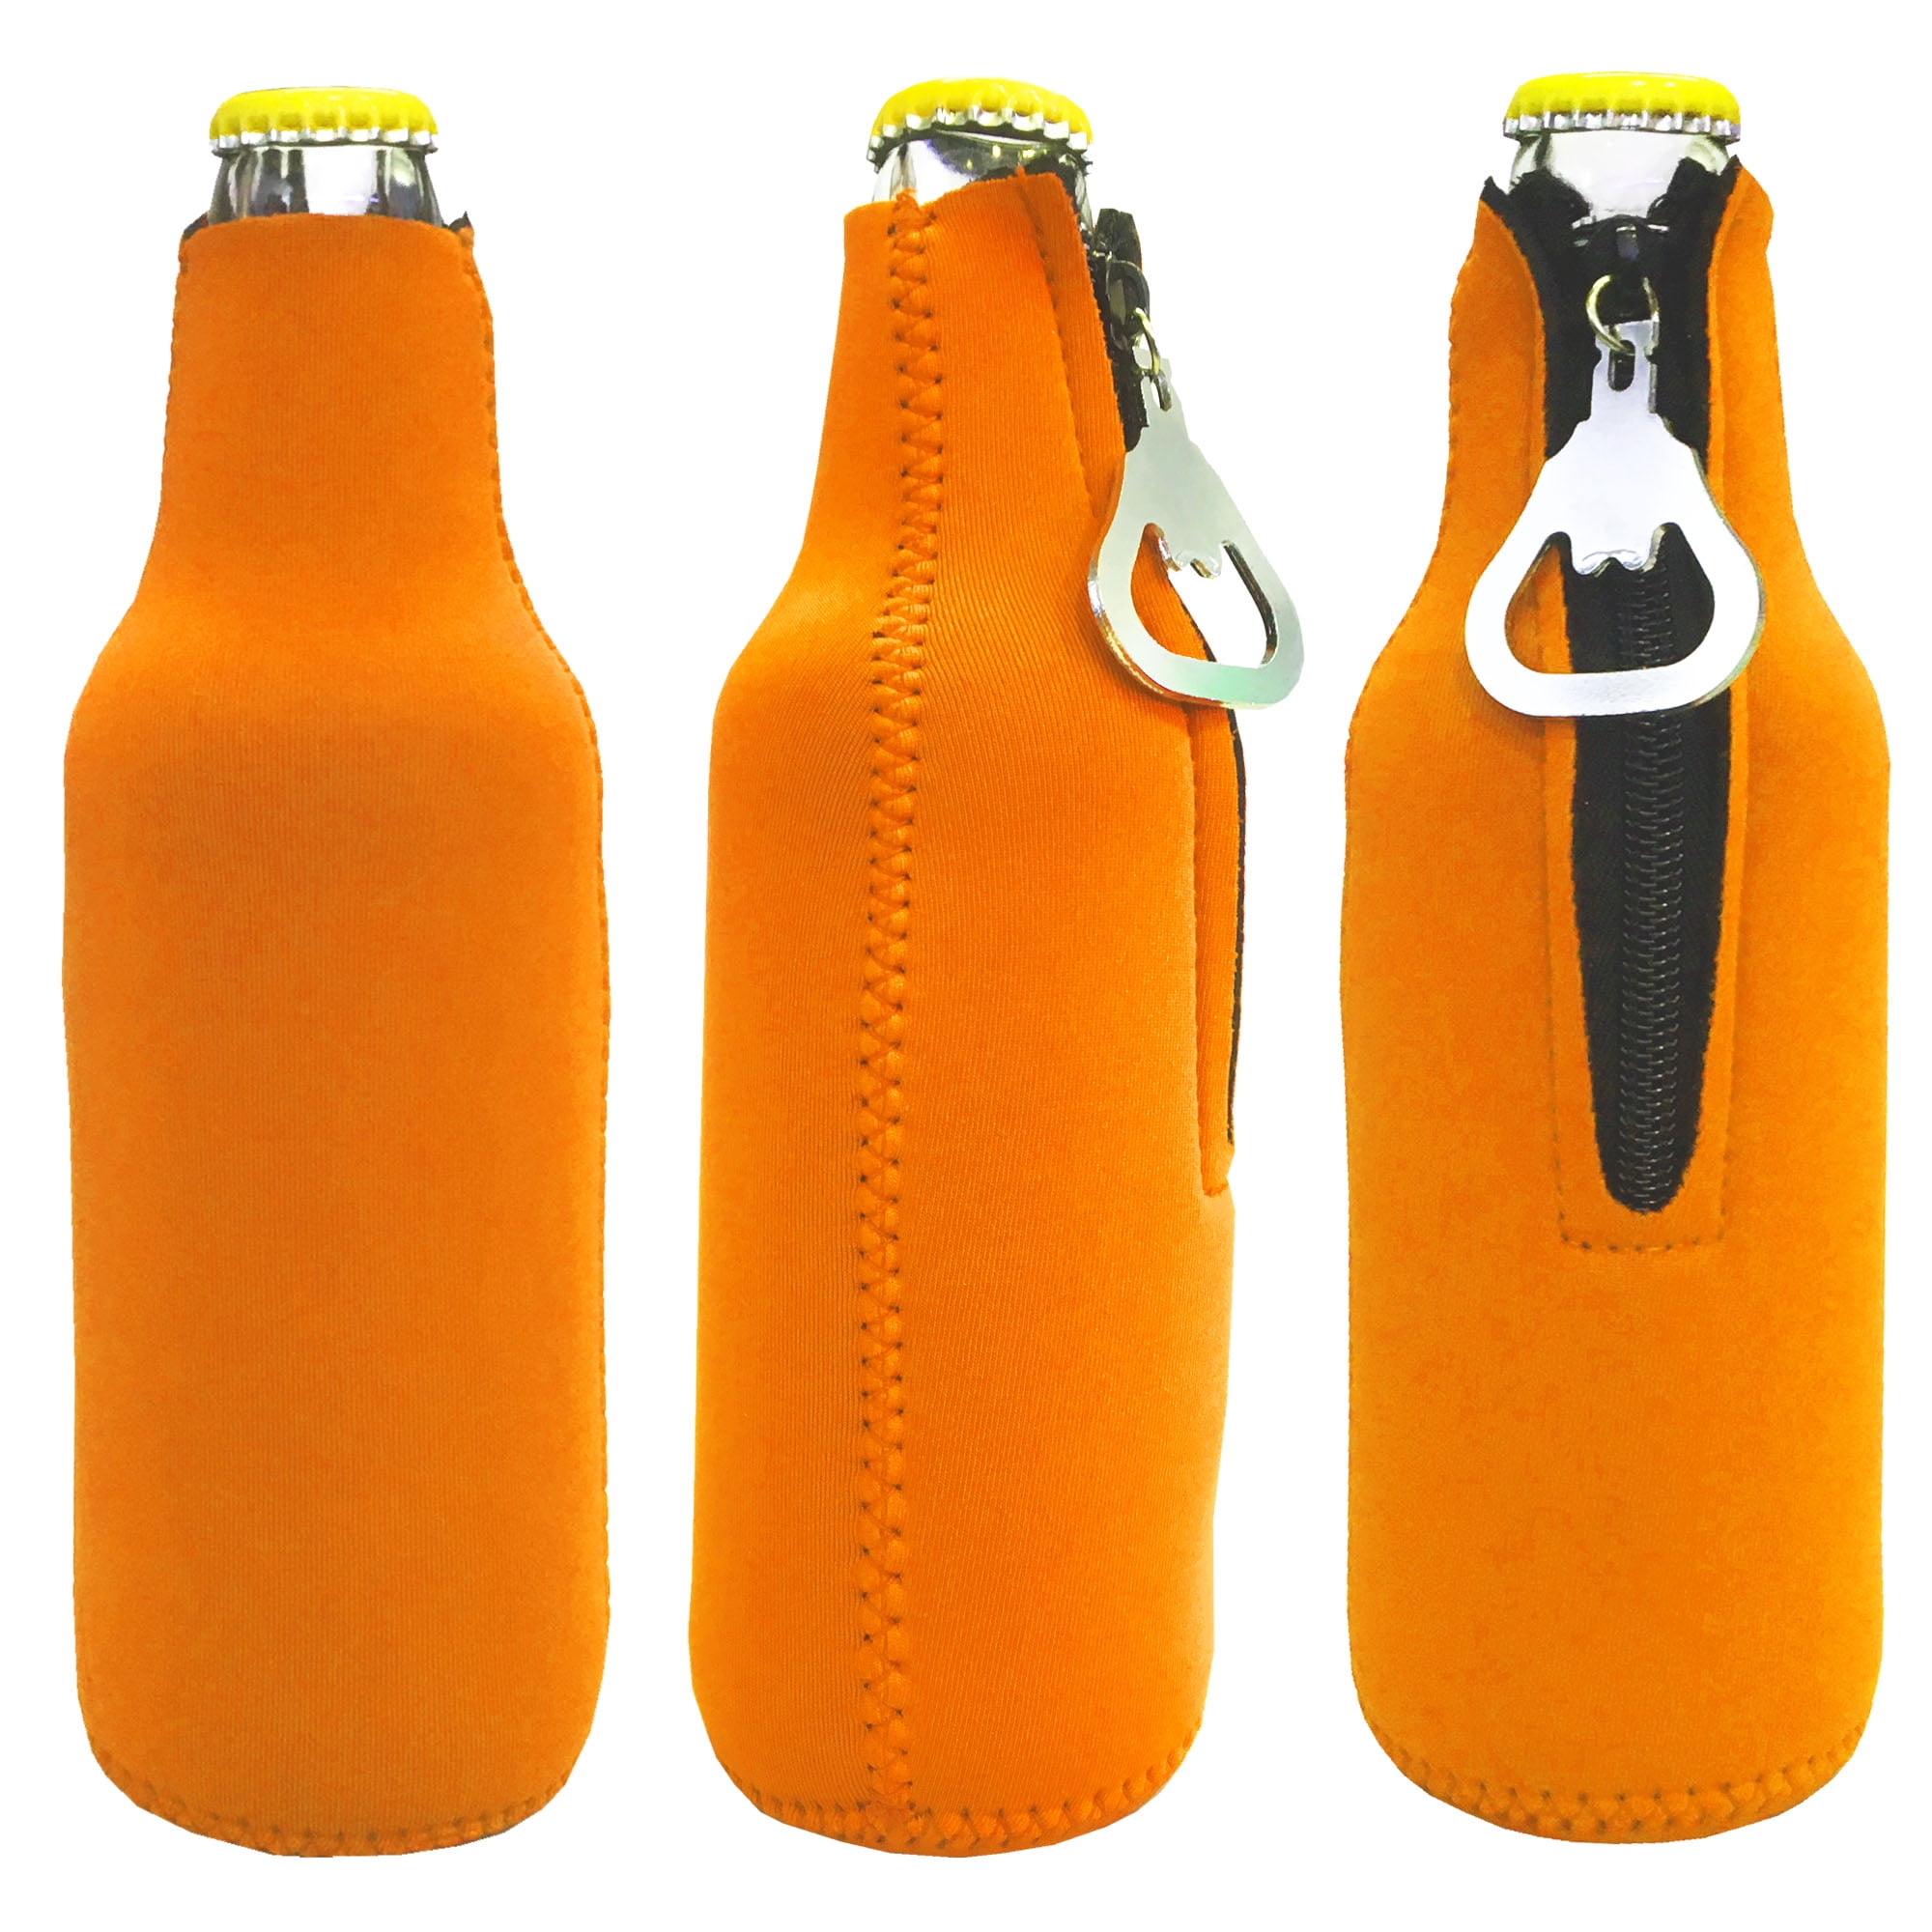  1PC Cute Boot Drink Holder Insulated Can Cover Beer Bottle  Sleeve for Girl's Party Favors Empty Gift Baskets for Christmas (B, One  Size) : Home & Kitchen